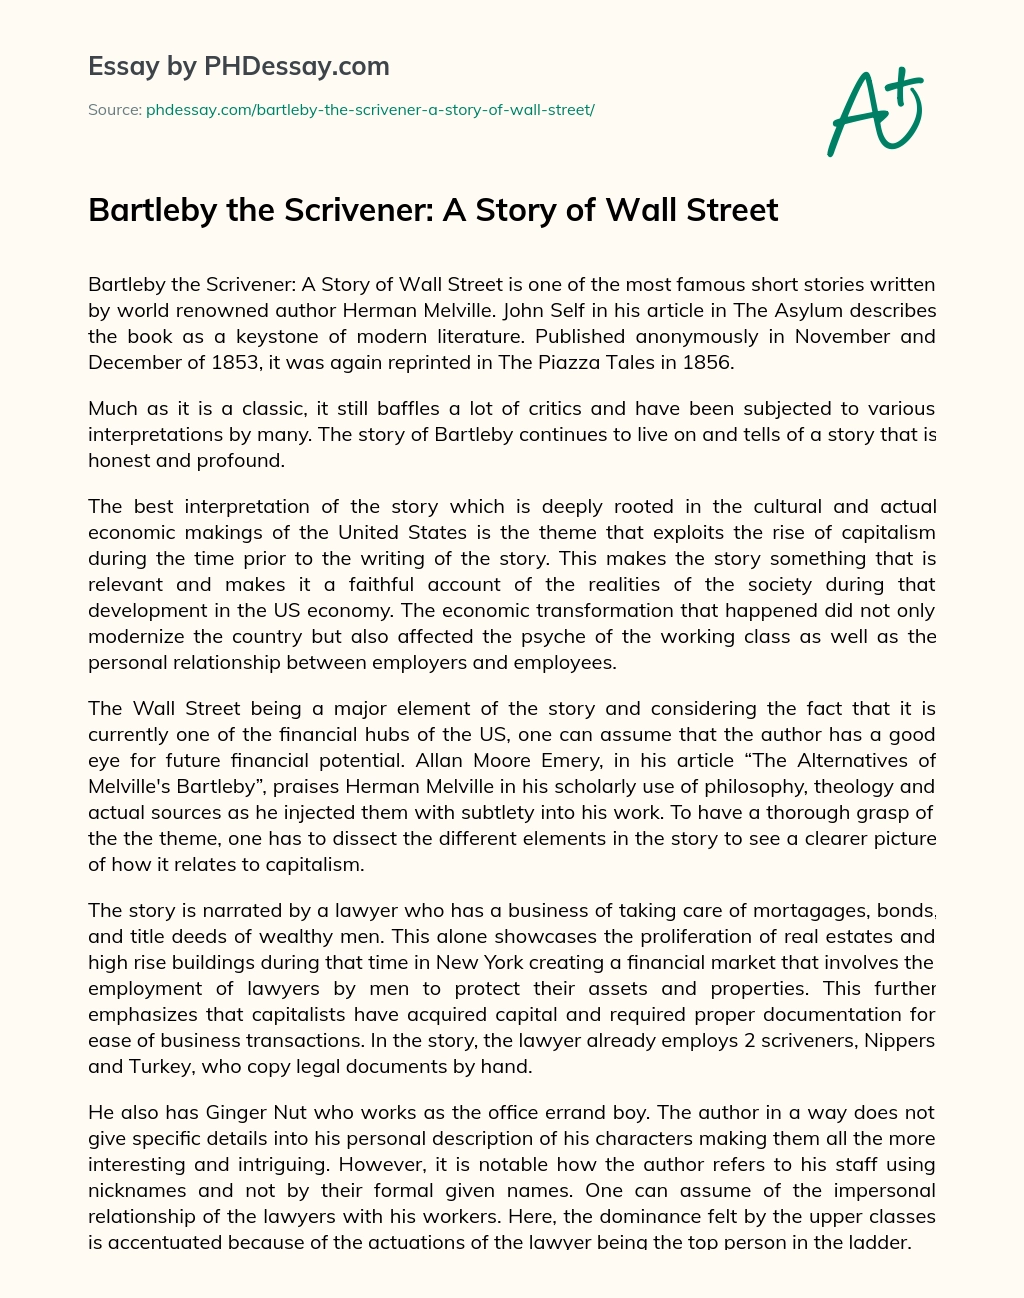 Bartleby the Scrivener: A Story of Wall Street essay